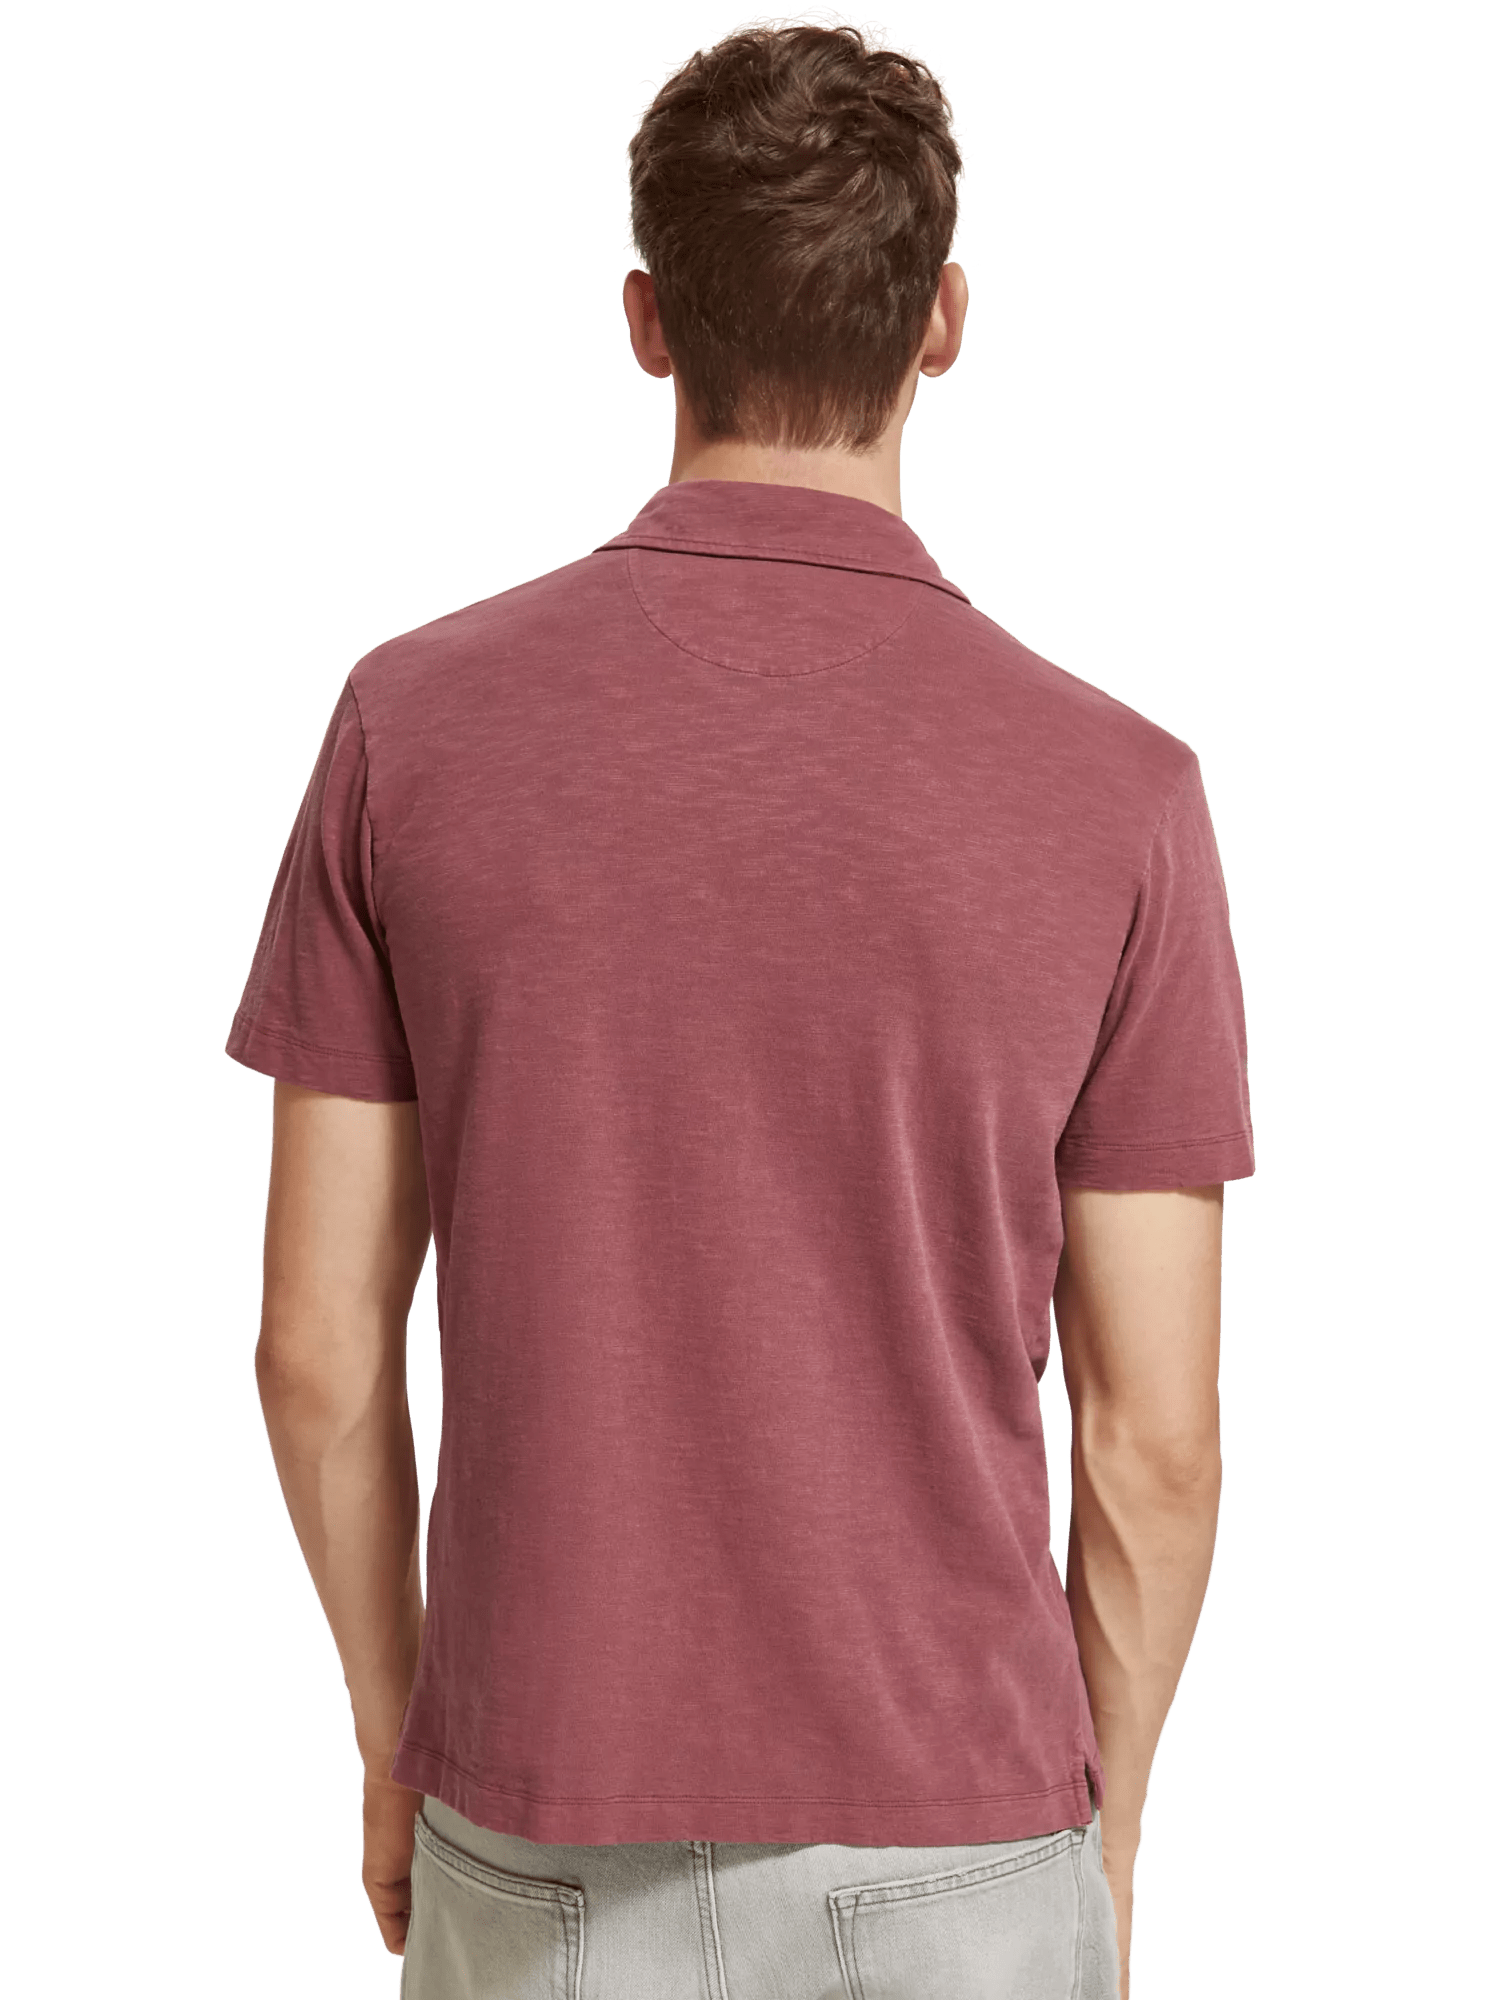 Scotch & Soda Garment-dyed jersey polo in Organic Cotton 174564_6722_MDL_BCK